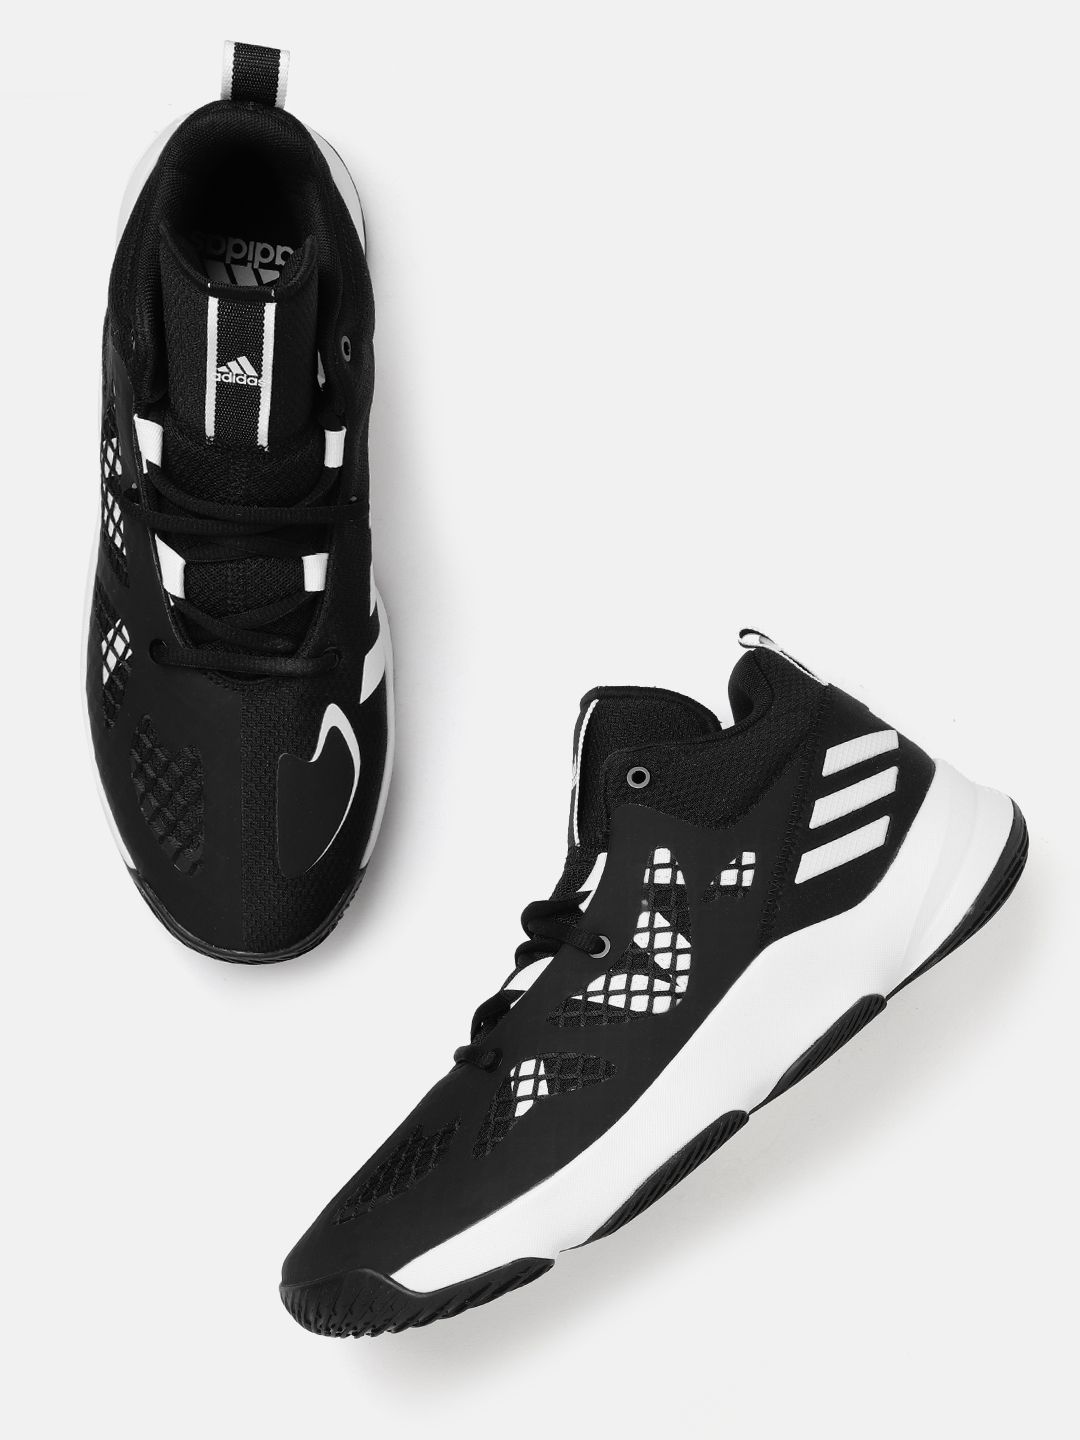 ADIDAS Unisex Black & White Woven Design Pro N3xt 2021 Basketball Shoes Price in India